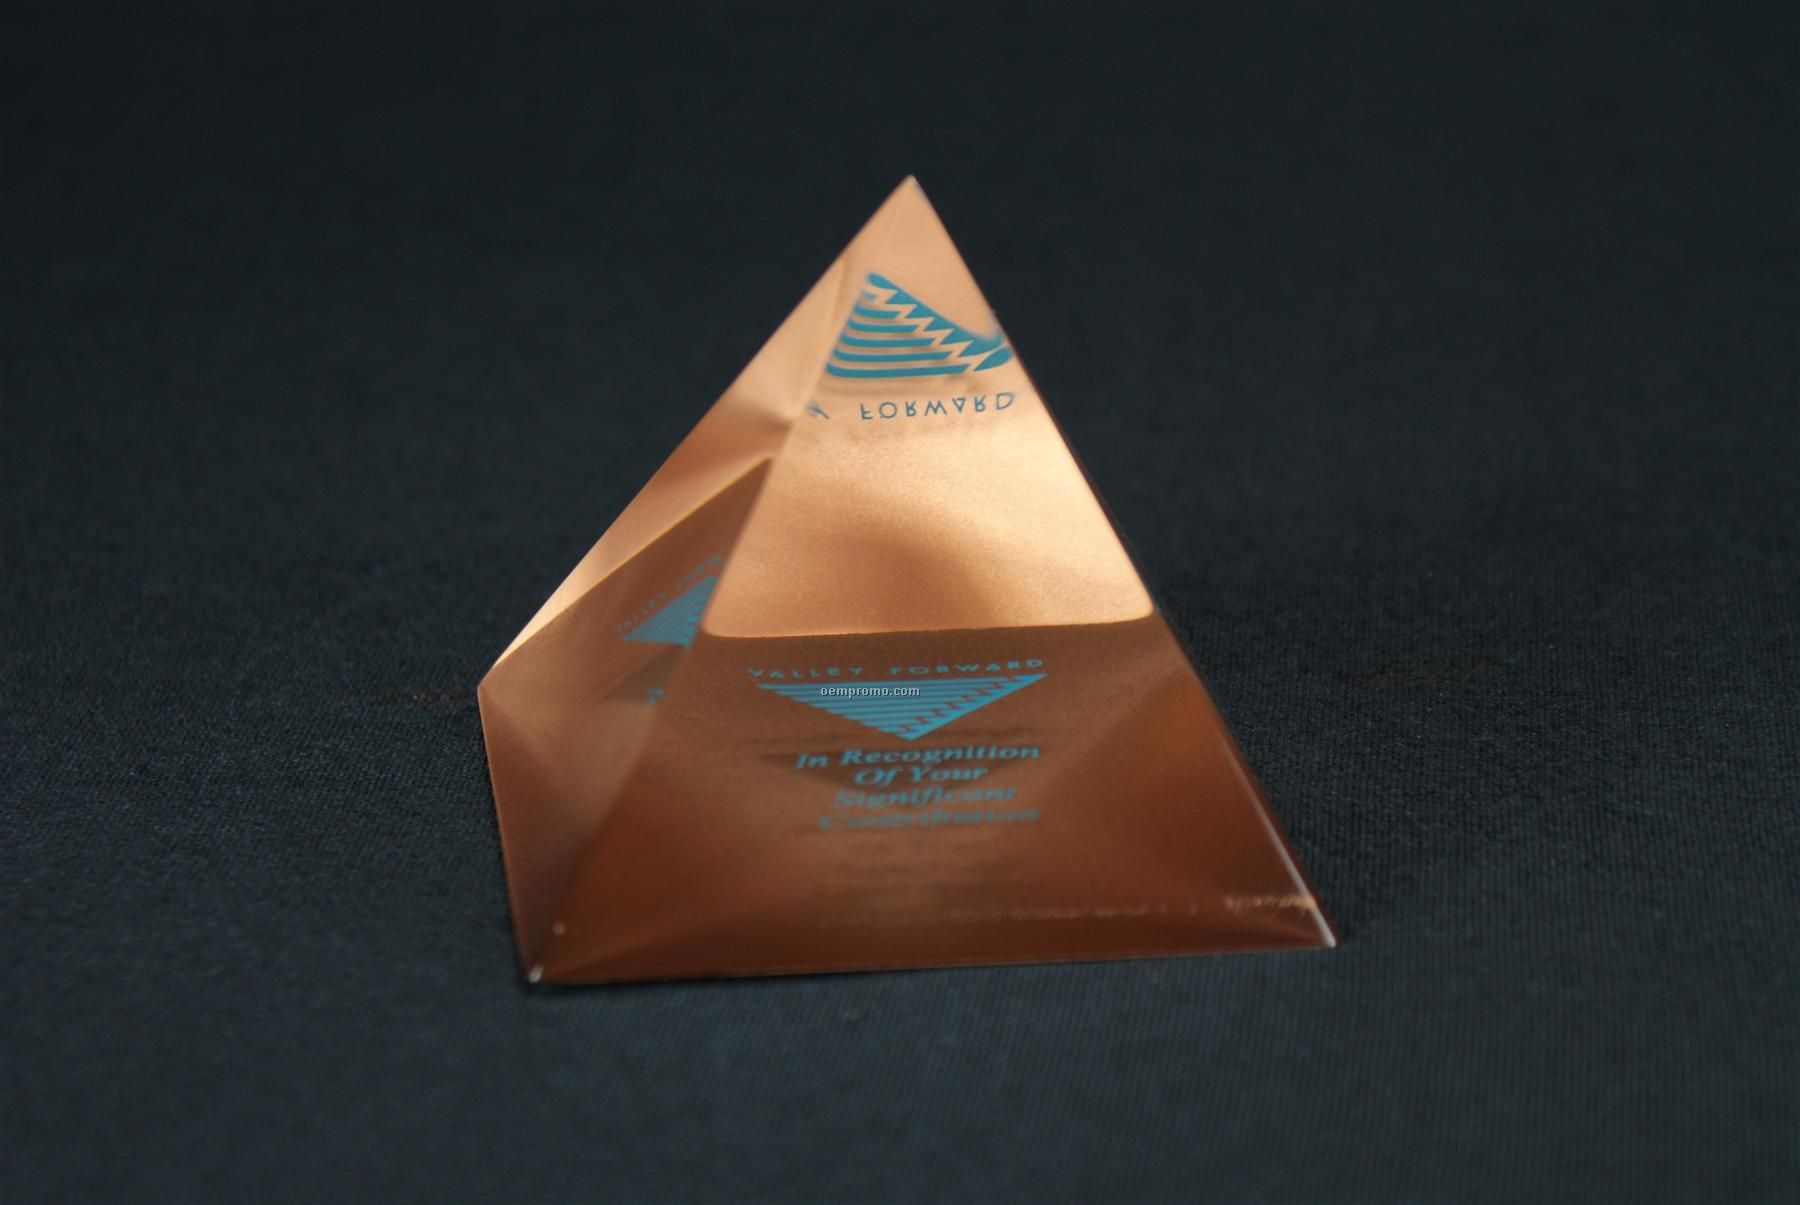 Lucite Pyramid - For Embedment Only (3